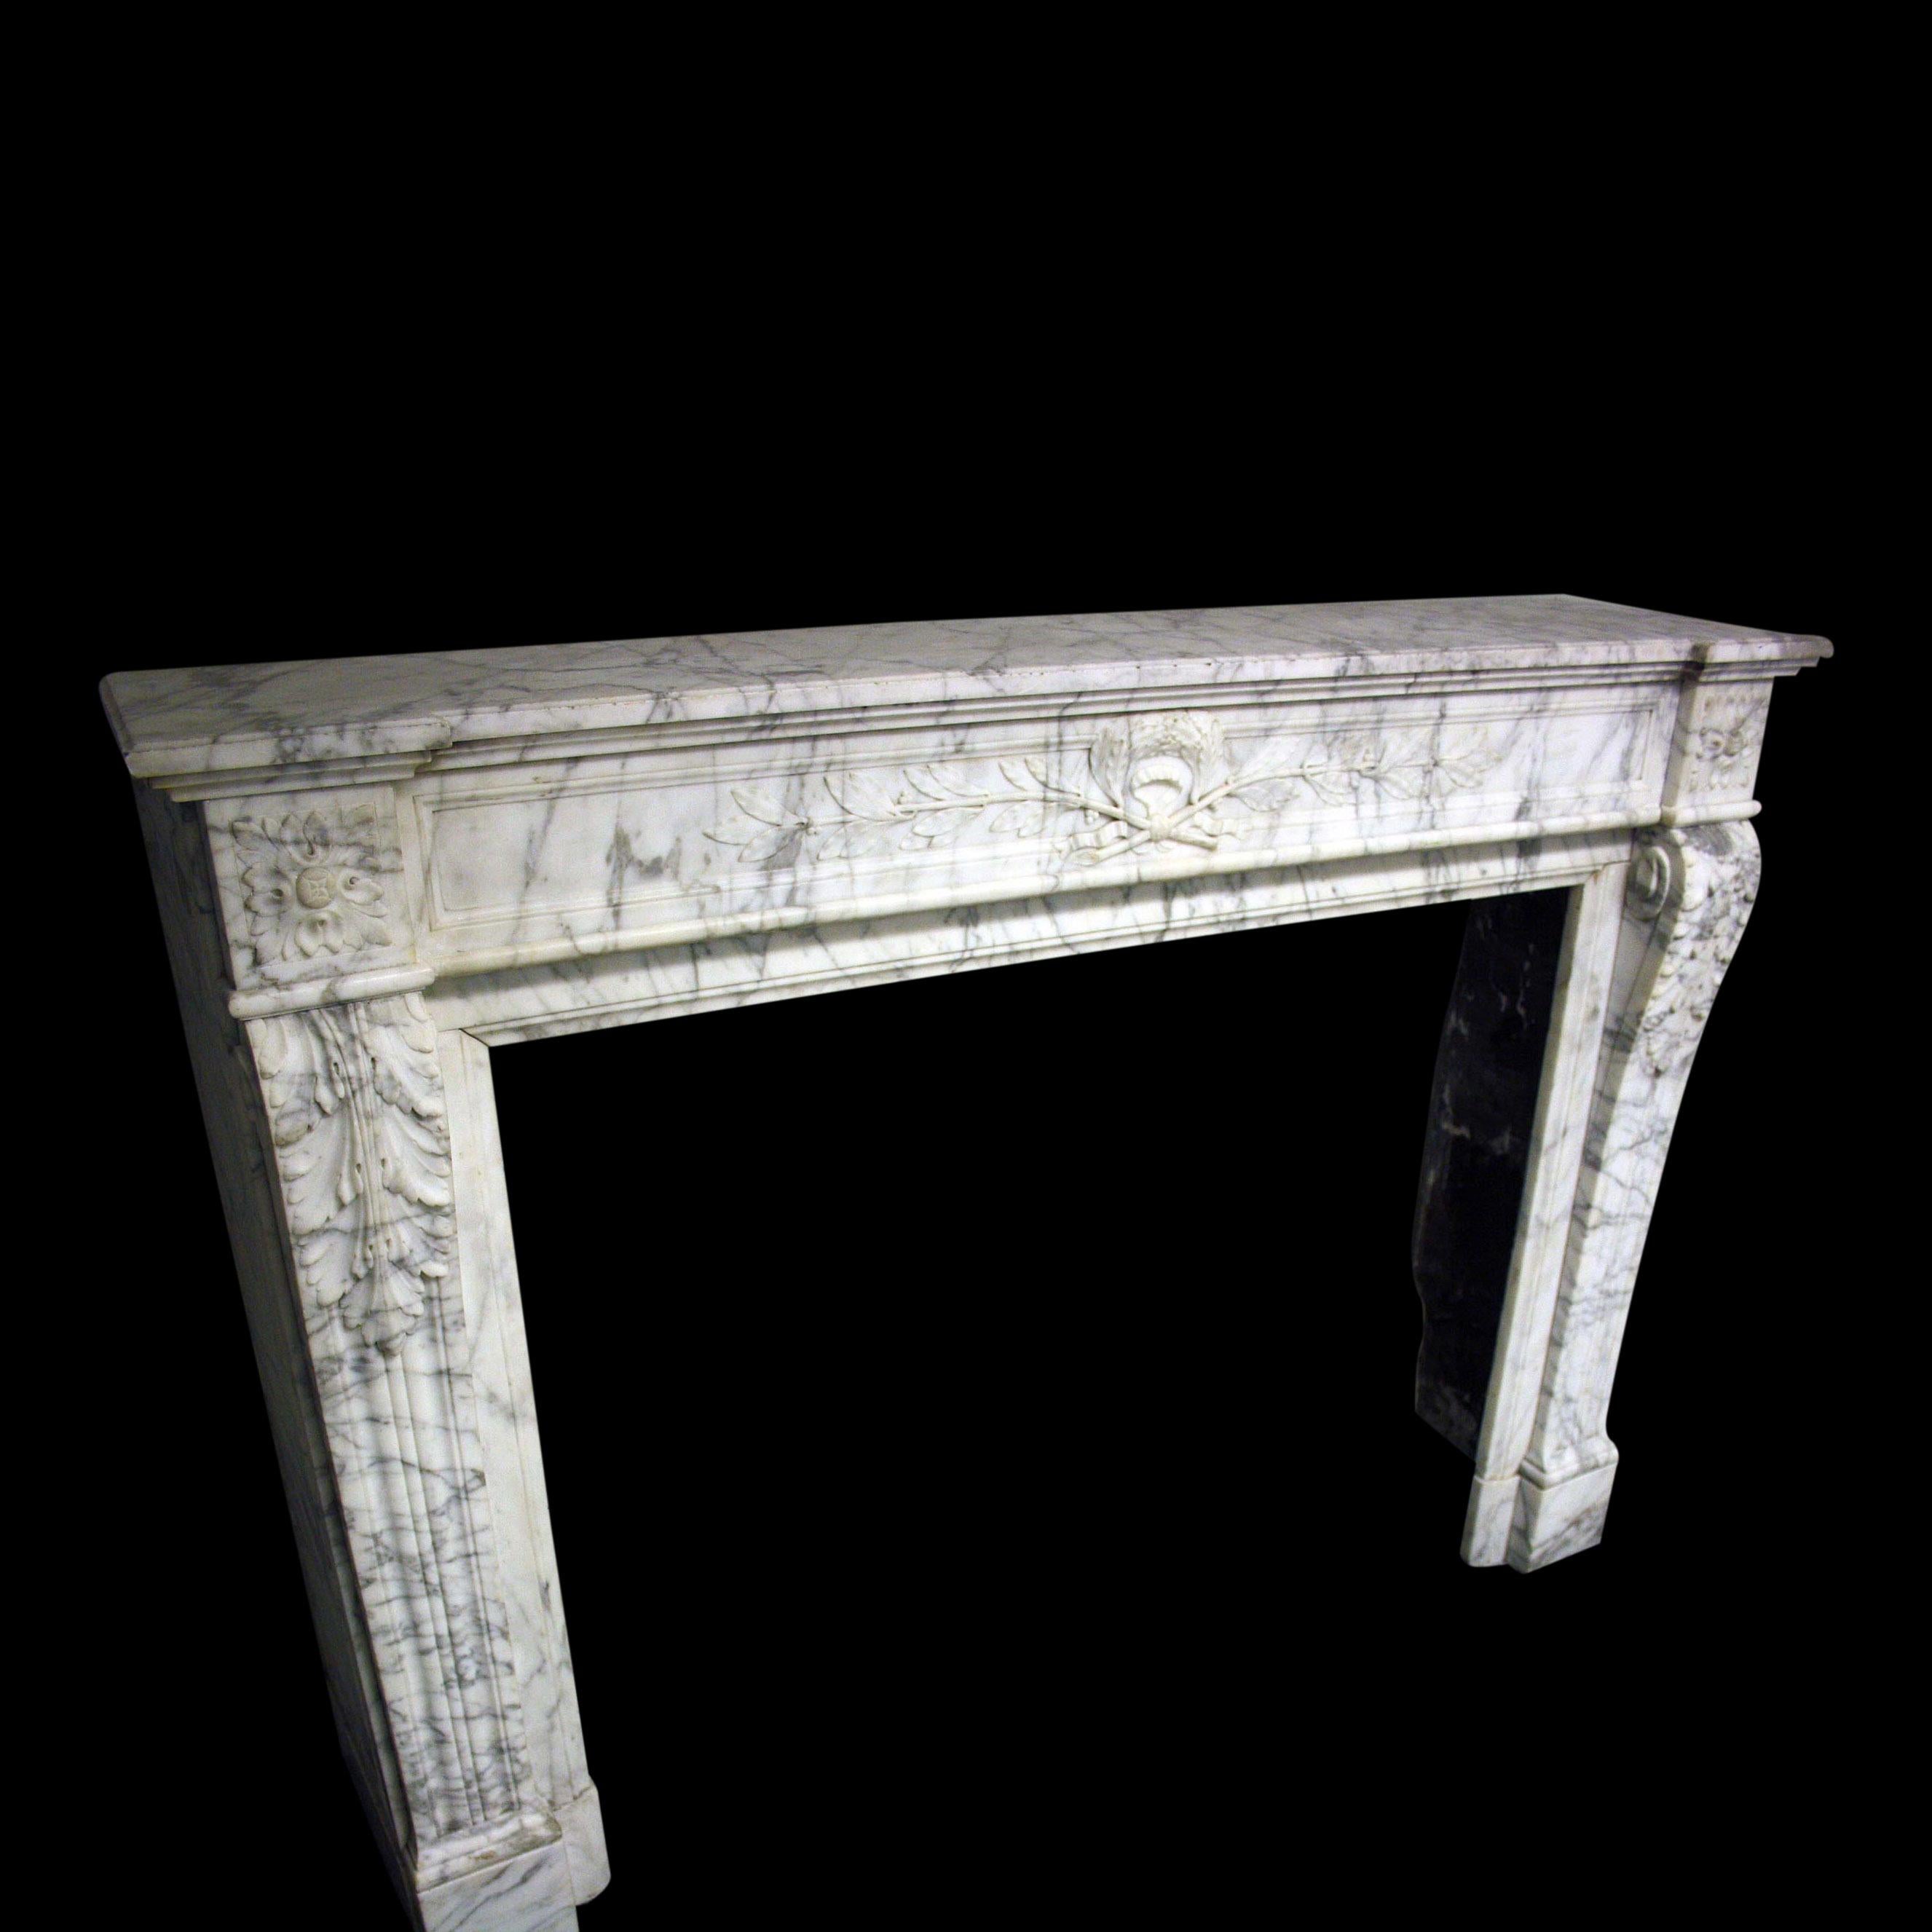 A French 19th century Carrara marble Chimneypiece in the Louis XVI manner

The Jambs formed of elongated moulded consoles with acanthus leaf terminals on plain block feet. The Frieze has a rectangular fielded panel with a central motif of